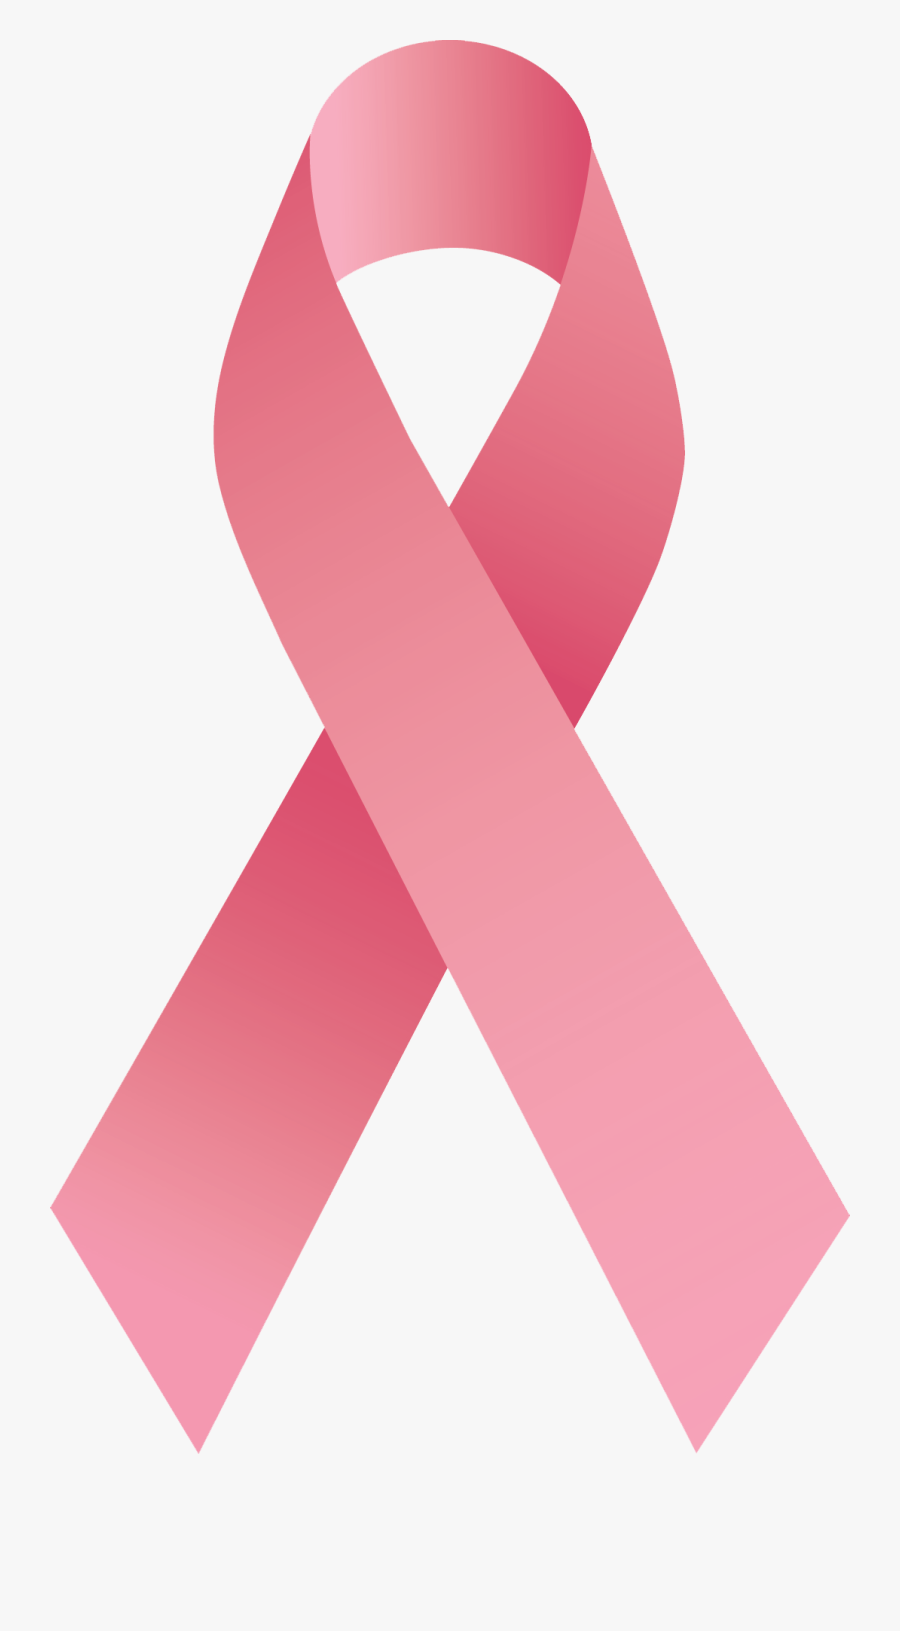 Breast Cancer Ribbon Png File - Breast Cancer Society Ribbon, Transparent Clipart